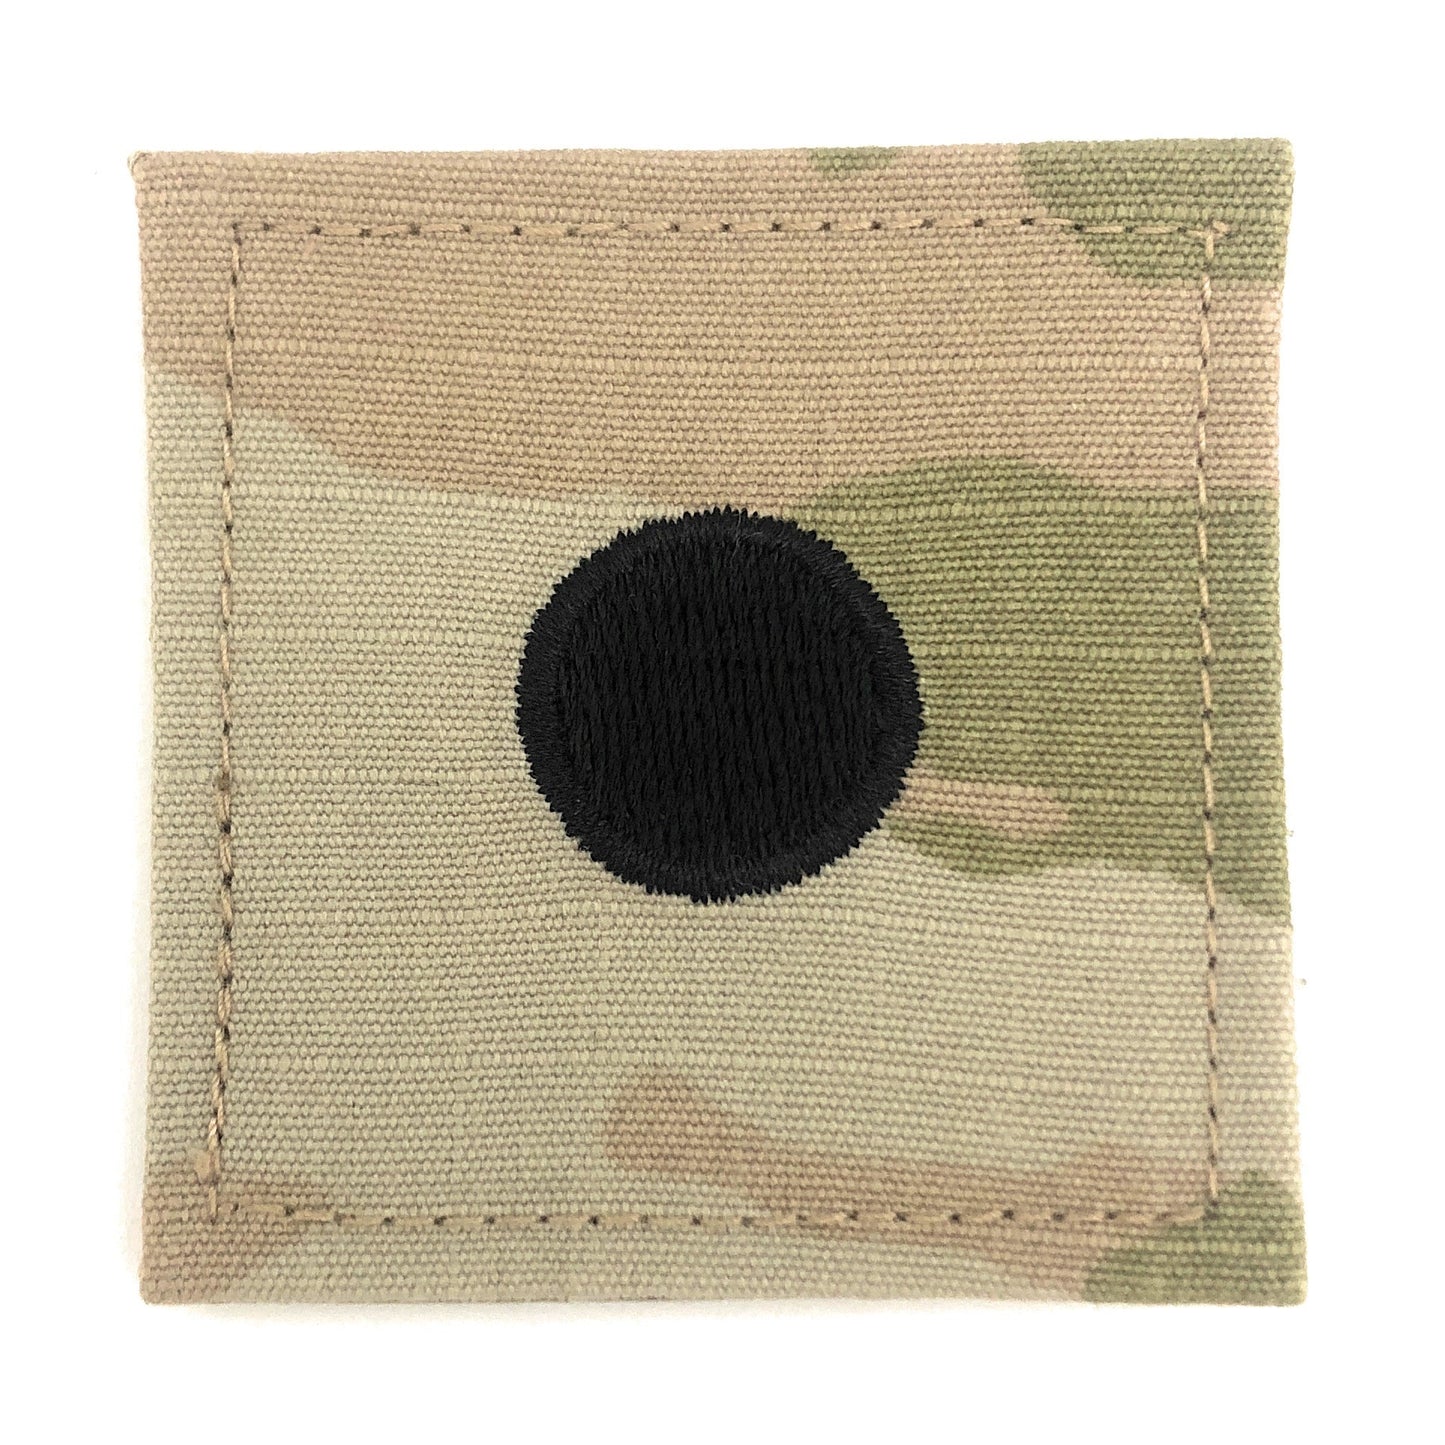 R.O.T.C. 2nd Lieutenant (Large Dot) OCP Rank with Hook Fastener